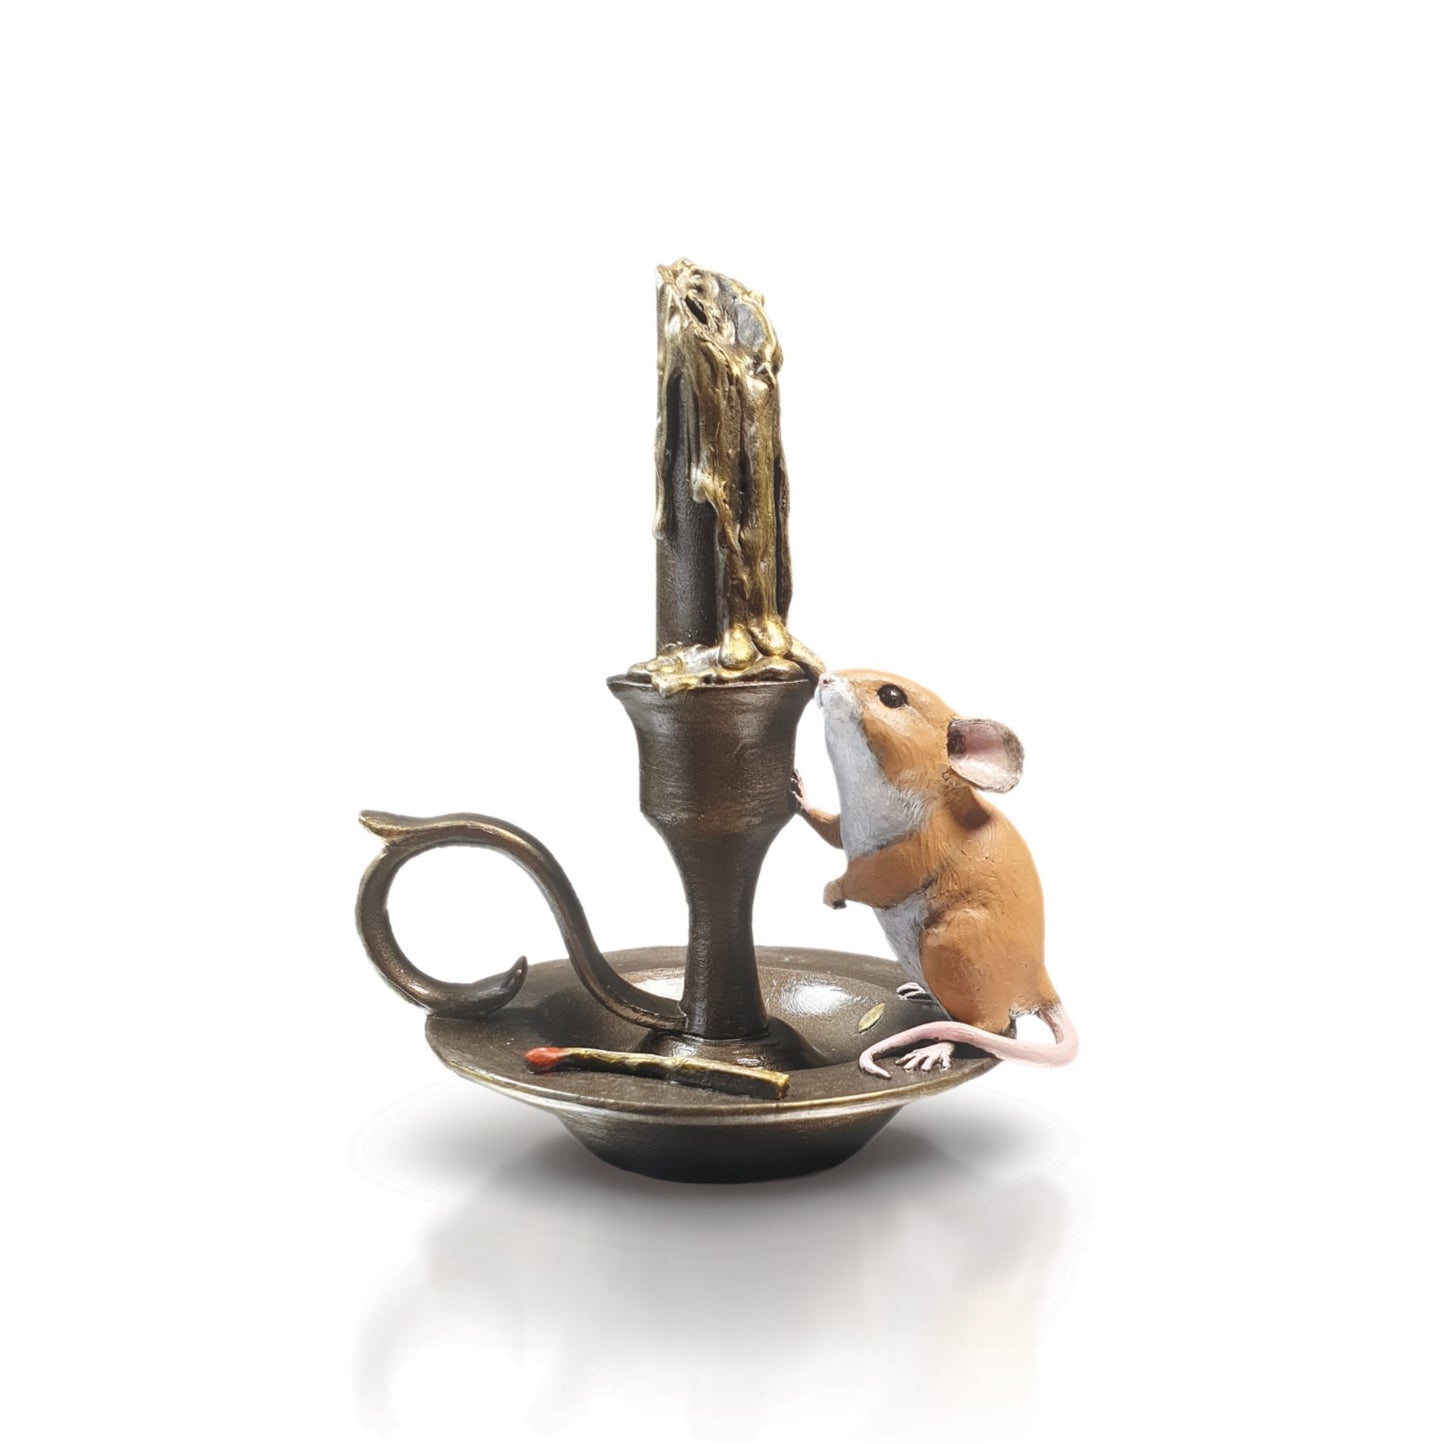 Mouse on Candlestick by Michael Simpson -Richard Cooper Studio Cold Cast & Hand Painted Bronze